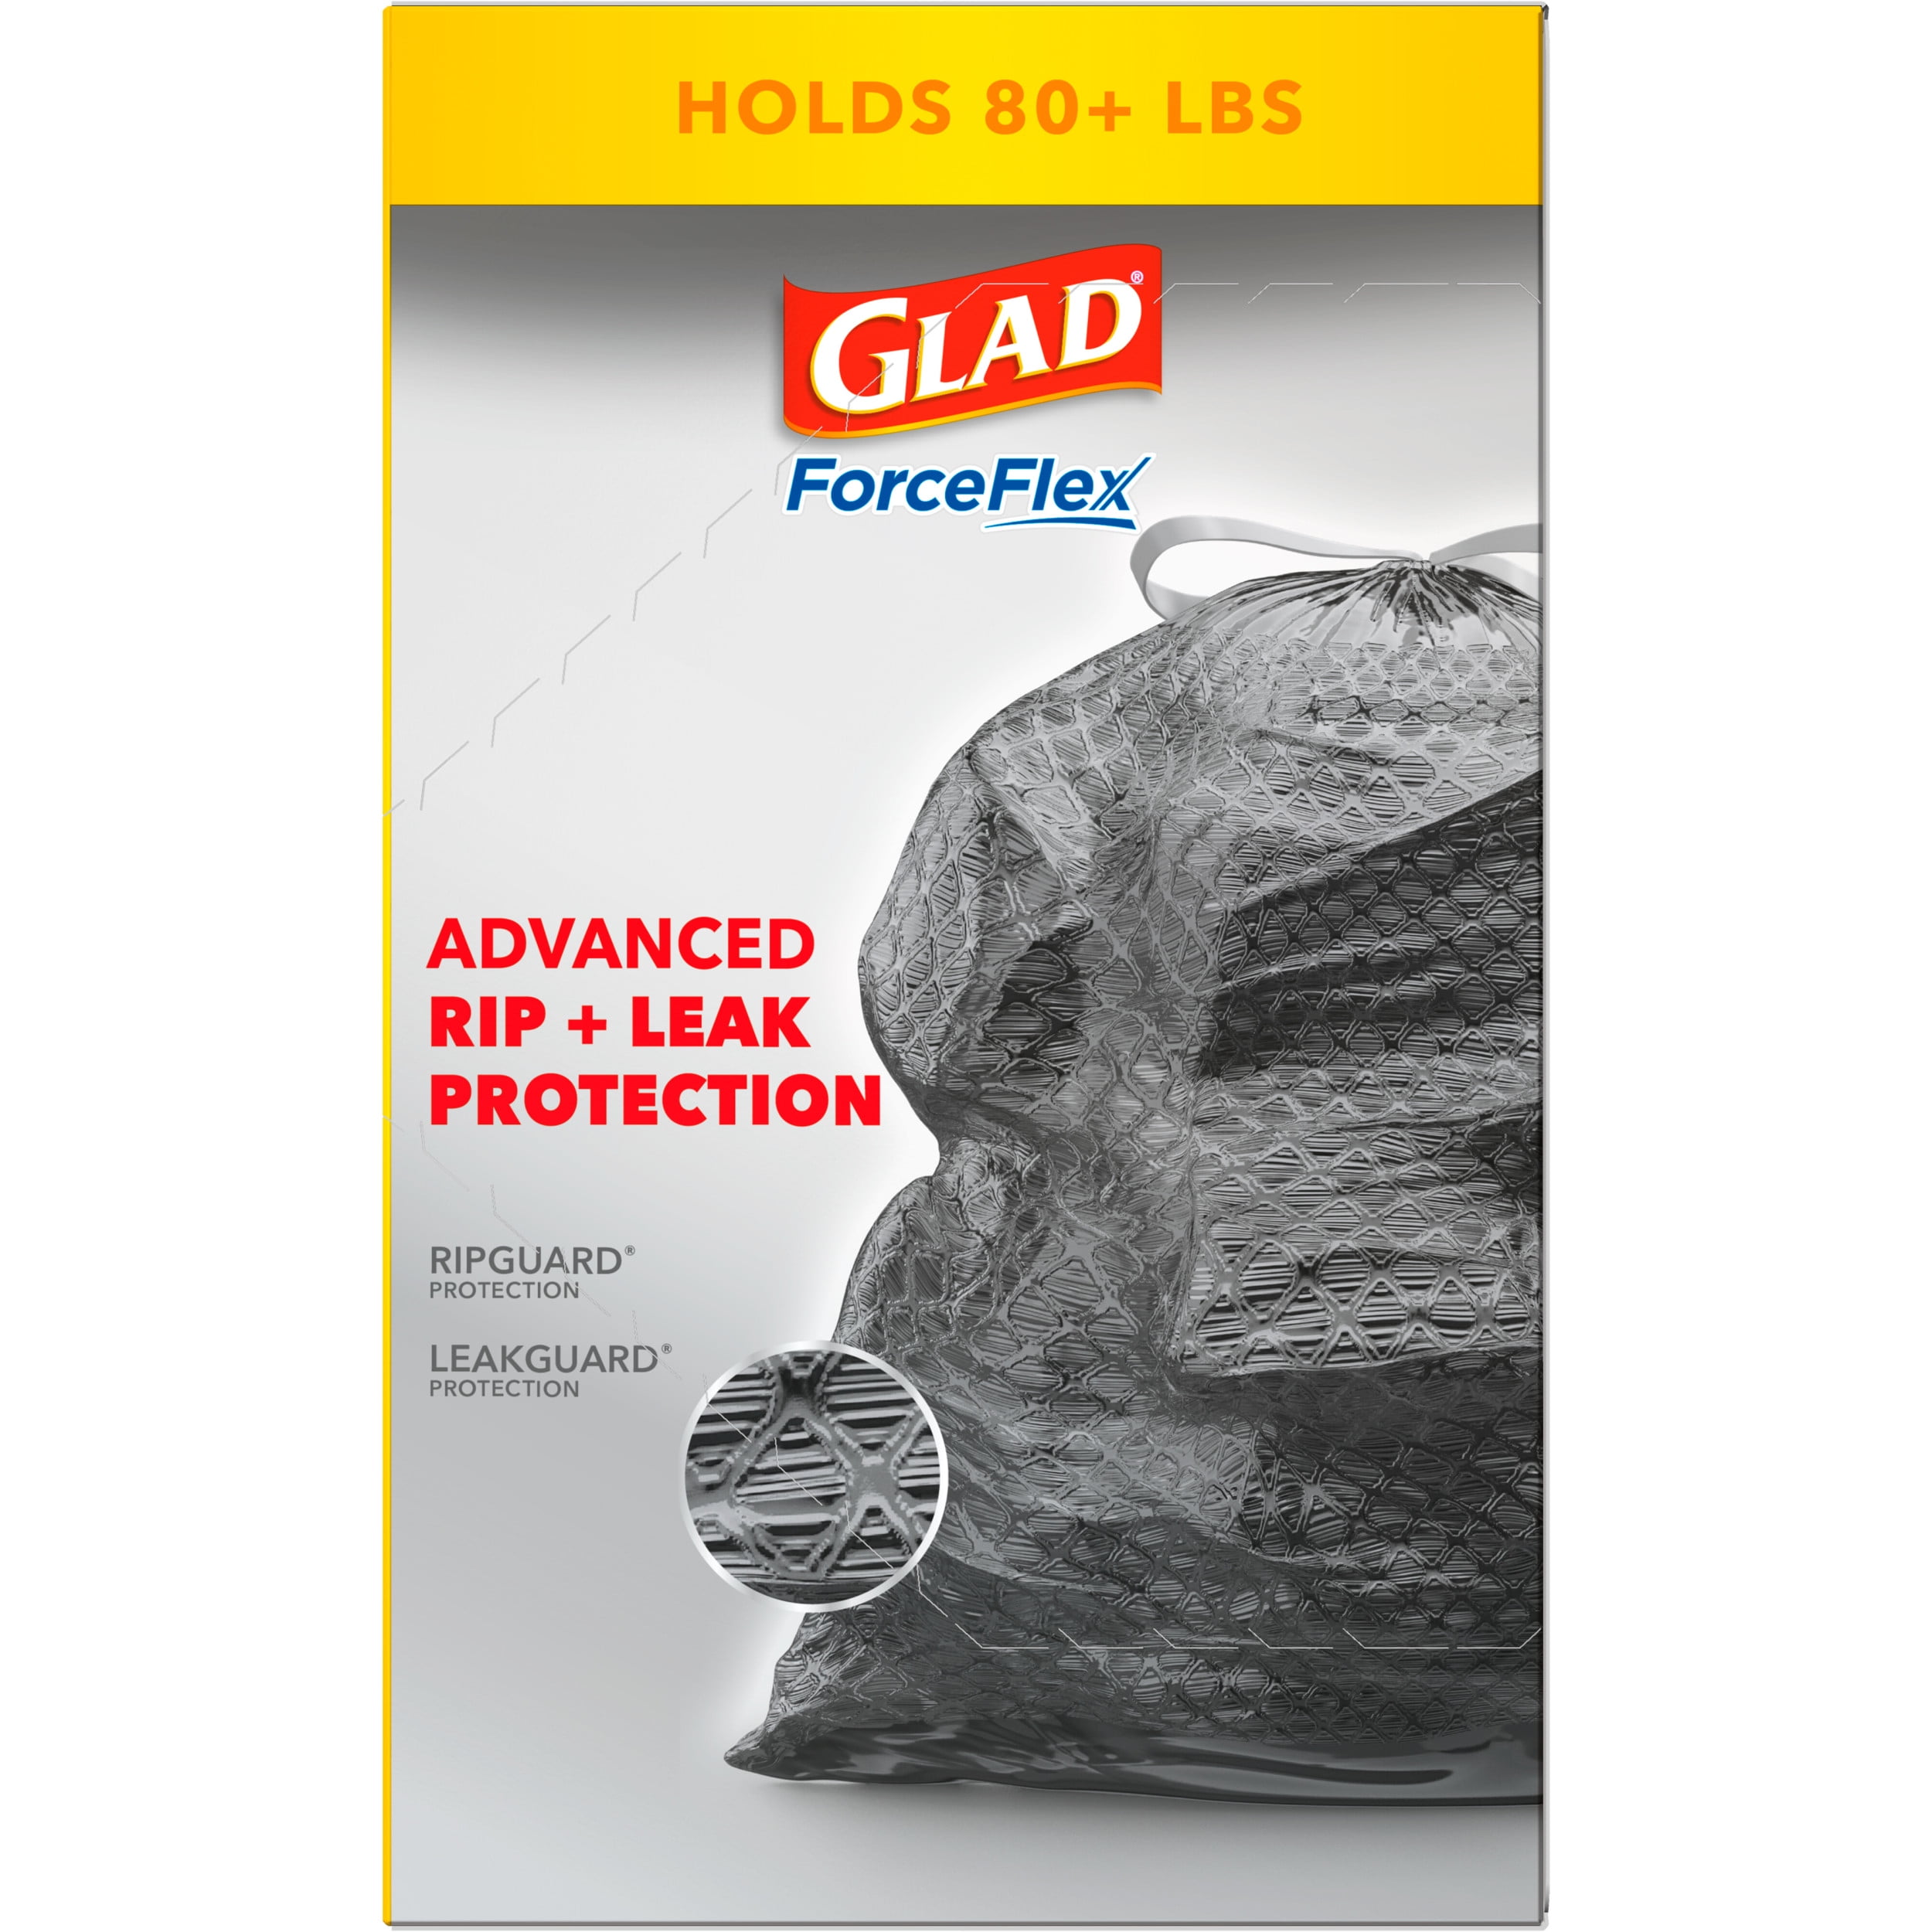 Glad Force Flex Stretchable Strength Rip Protection 30 Gallon Large  Drawstring Trash Bags 25ct